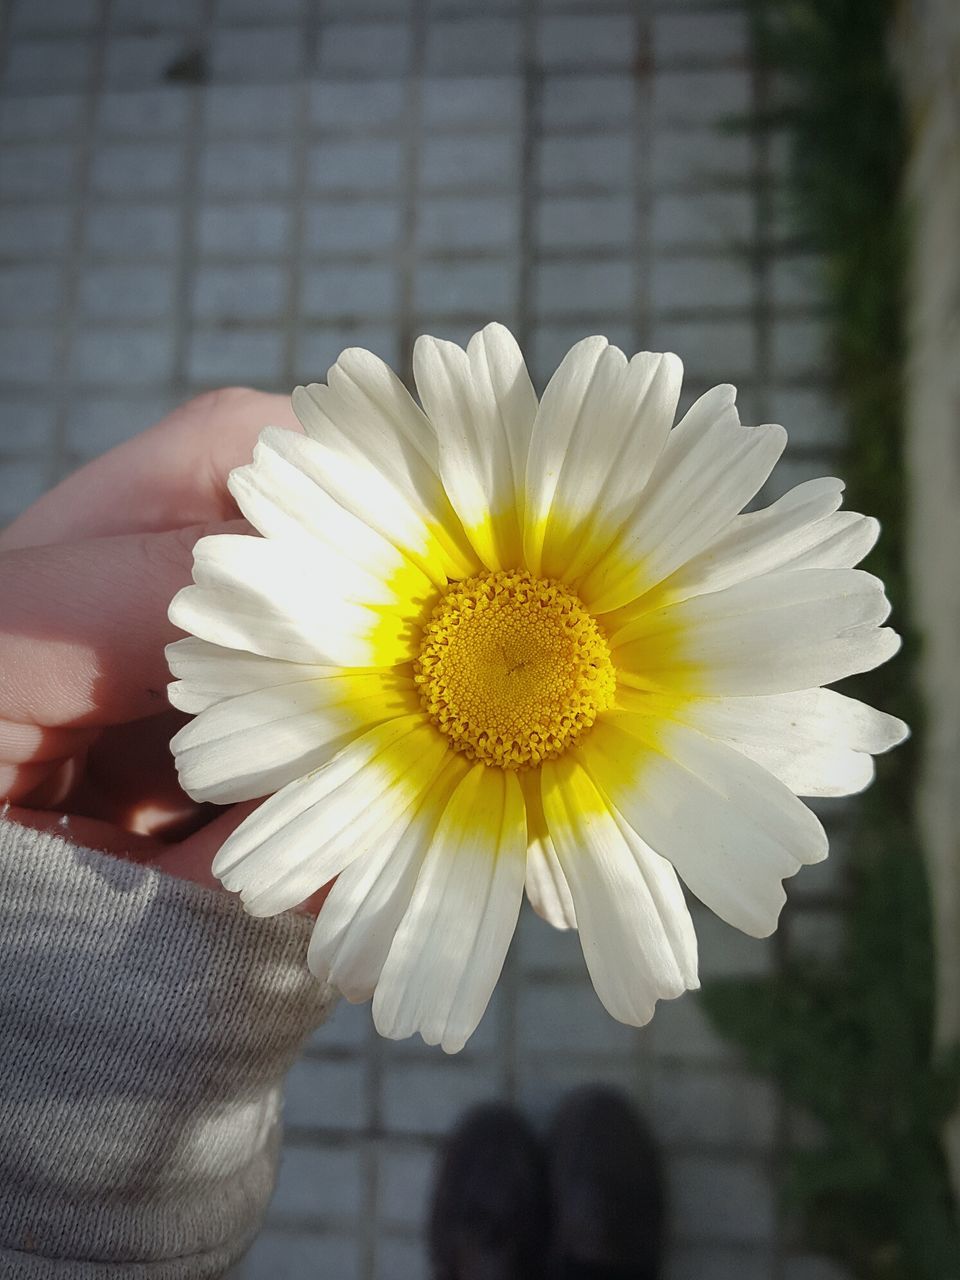 flower, petal, flower head, freshness, fragility, daisy, pollen, white color, close-up, focus on foreground, yellow, beauty in nature, part of, blooming, cropped, nature, day, stamen, outdoors, growth, selective focus, white, in bloom, botany, blossom, softness